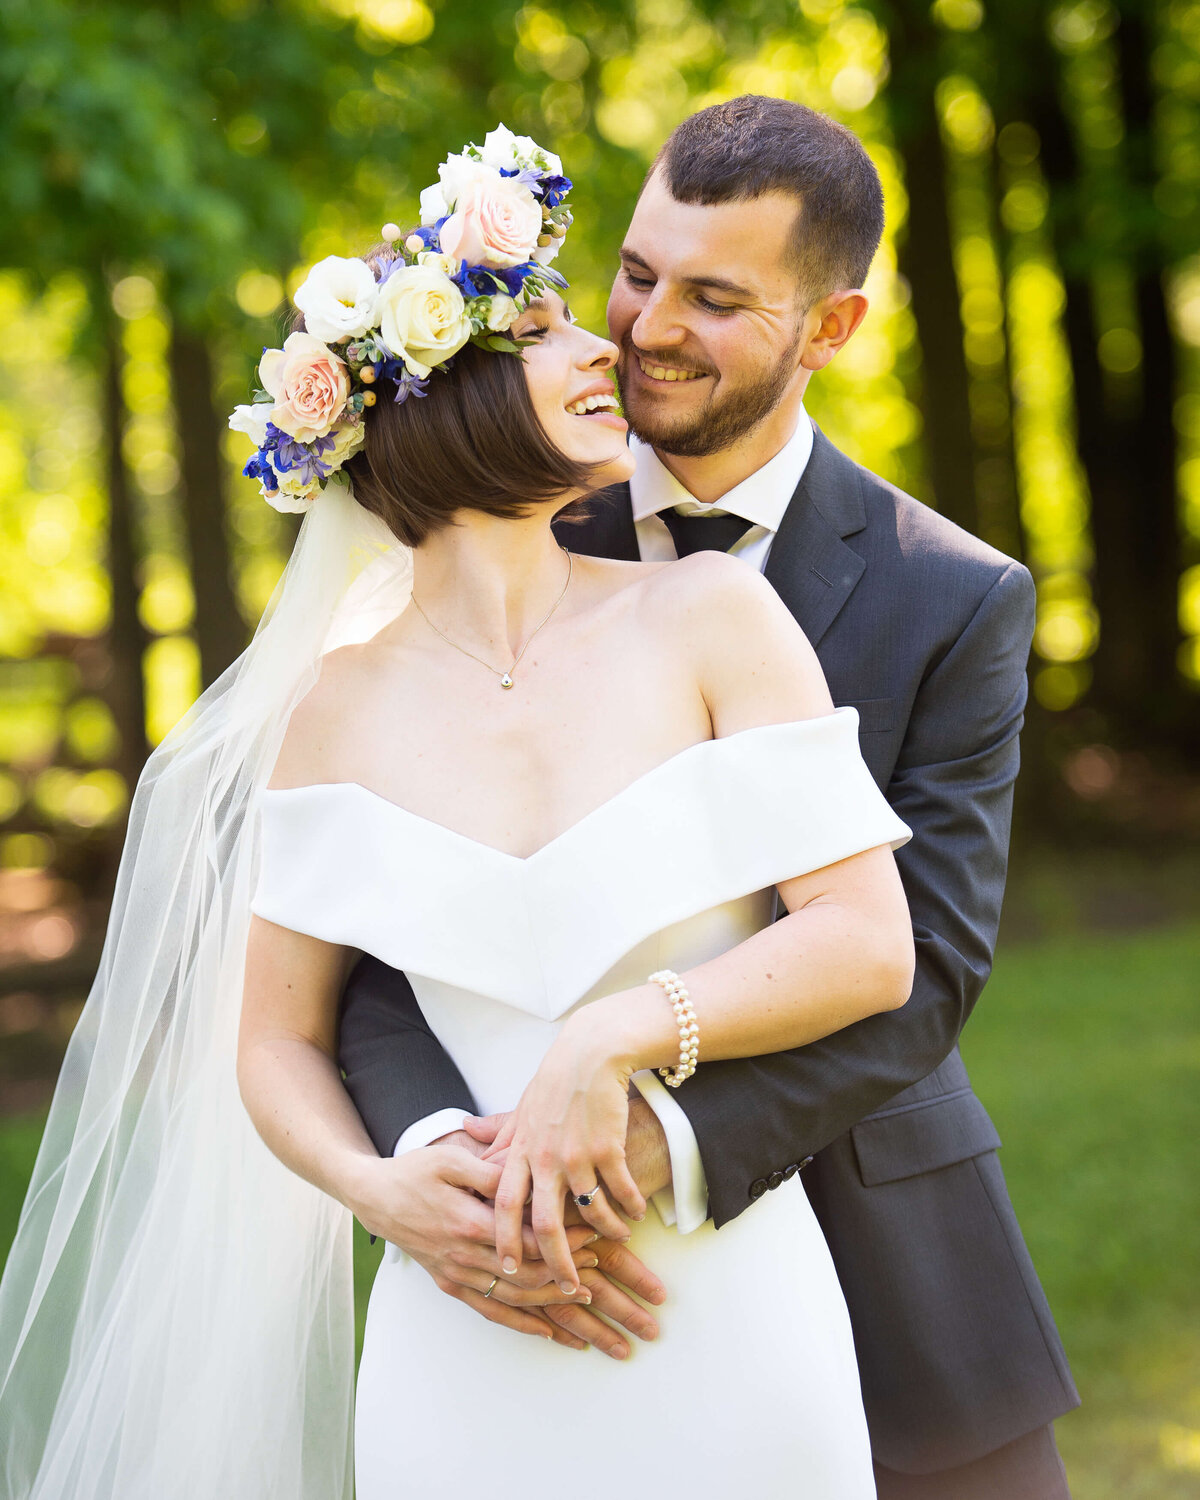 A bride wearing a floral crown is hugged by her groom from behind during their Ottawa wedding photos